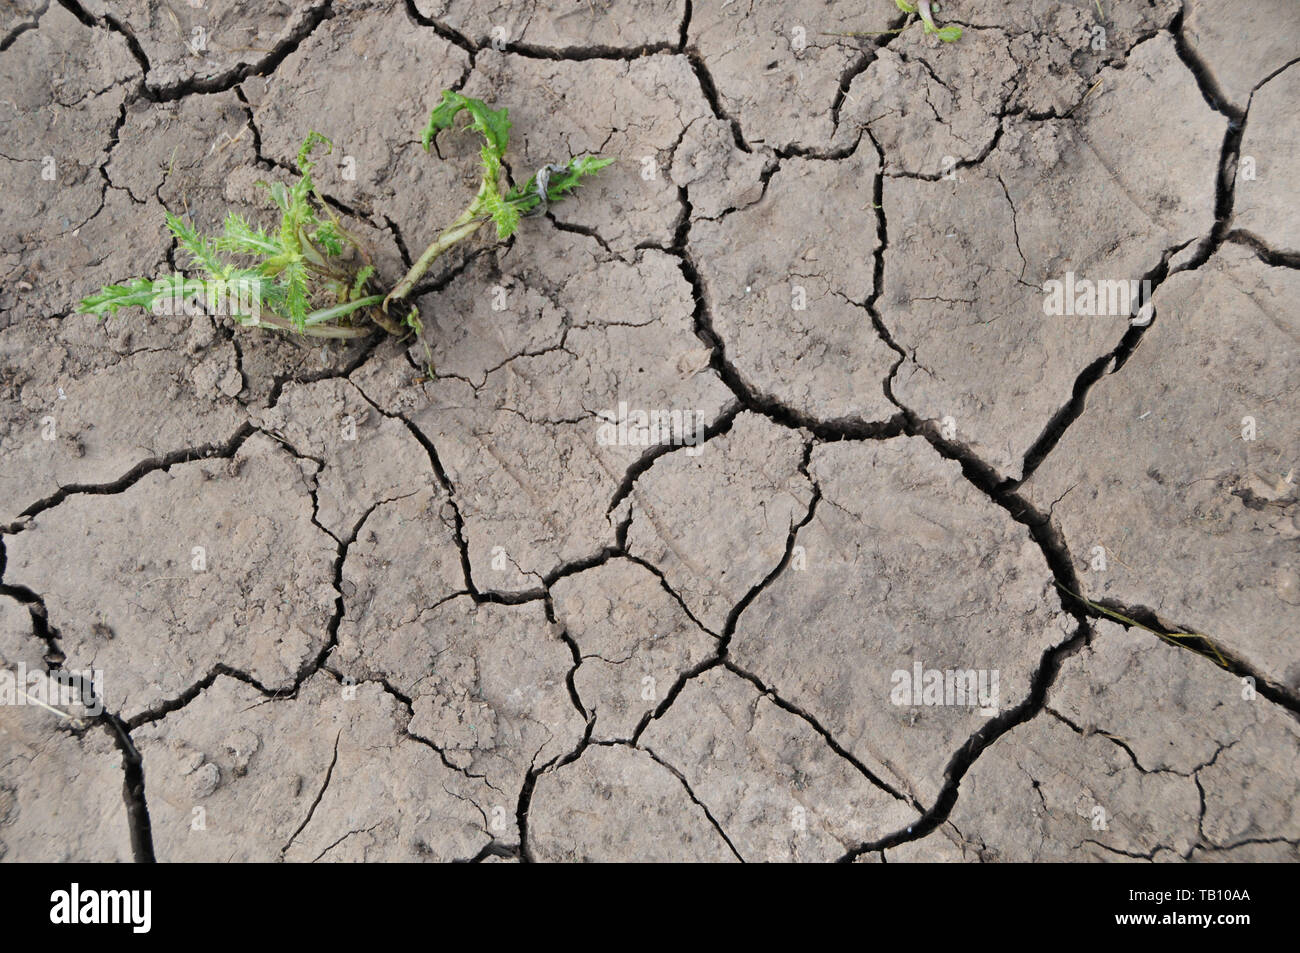 Drought parched dry cracked soil earth climate change. Stock Photo